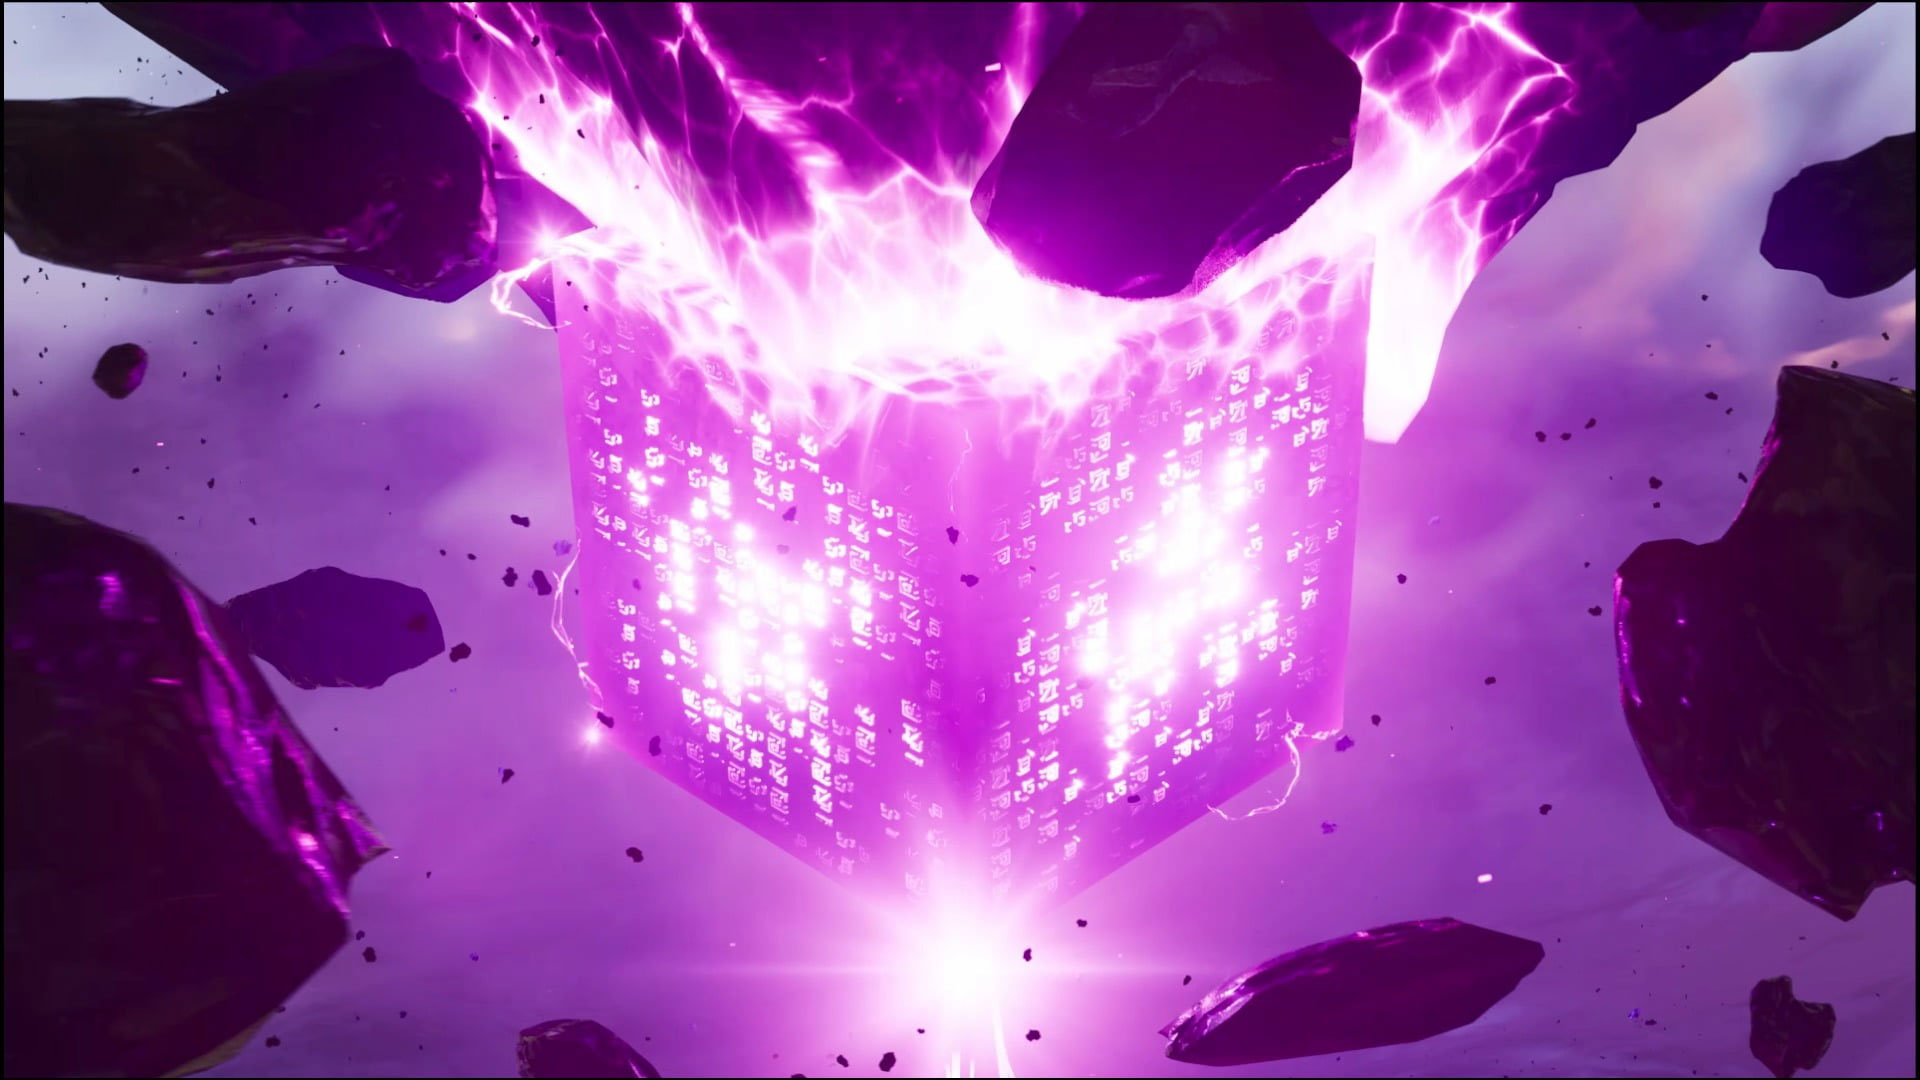 Fortnite wallpaper, Xbox One, video games, purple, water, indoors, pink color